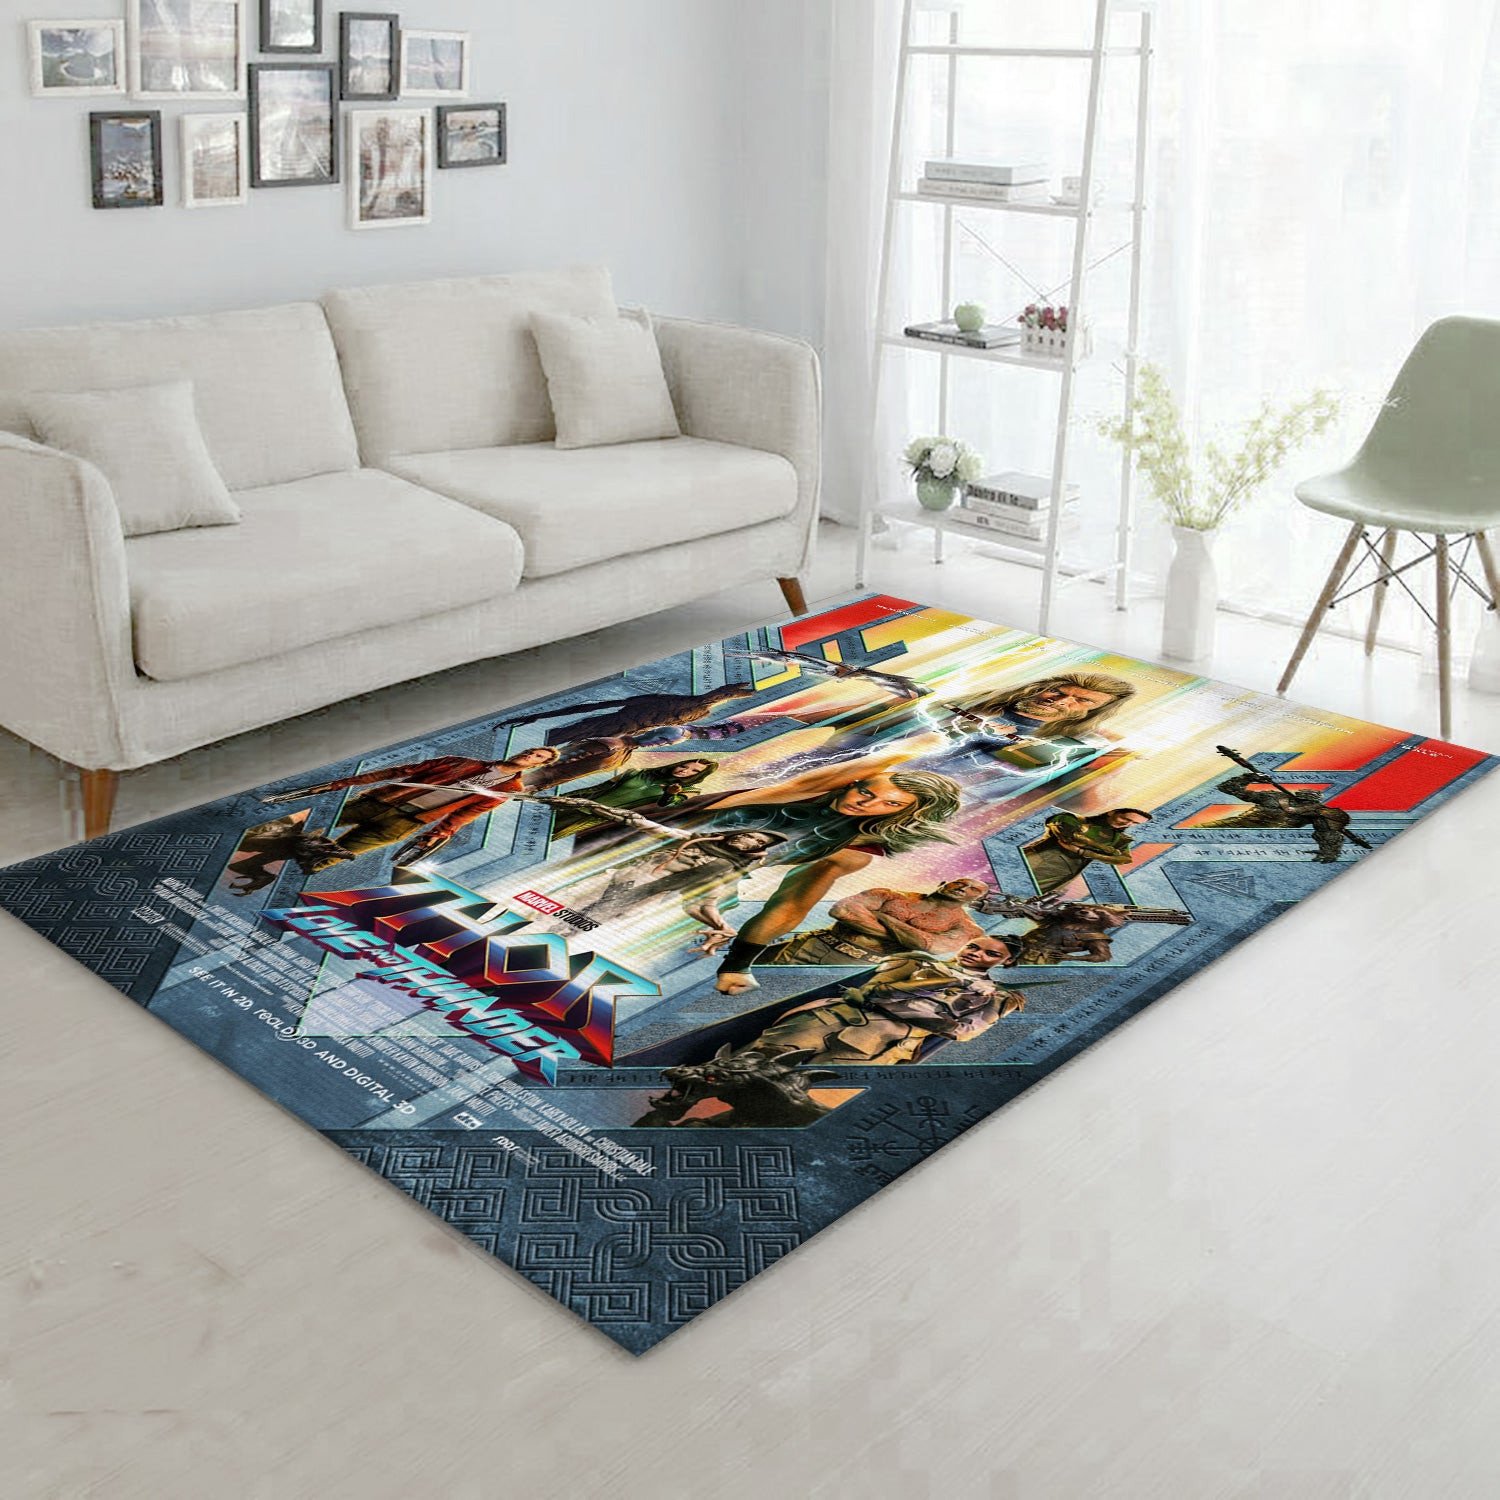 Thor Love And Thunder Movie Area Rug, Bedroom Rug - Home US Decor - Indoor Outdoor Rugs 2